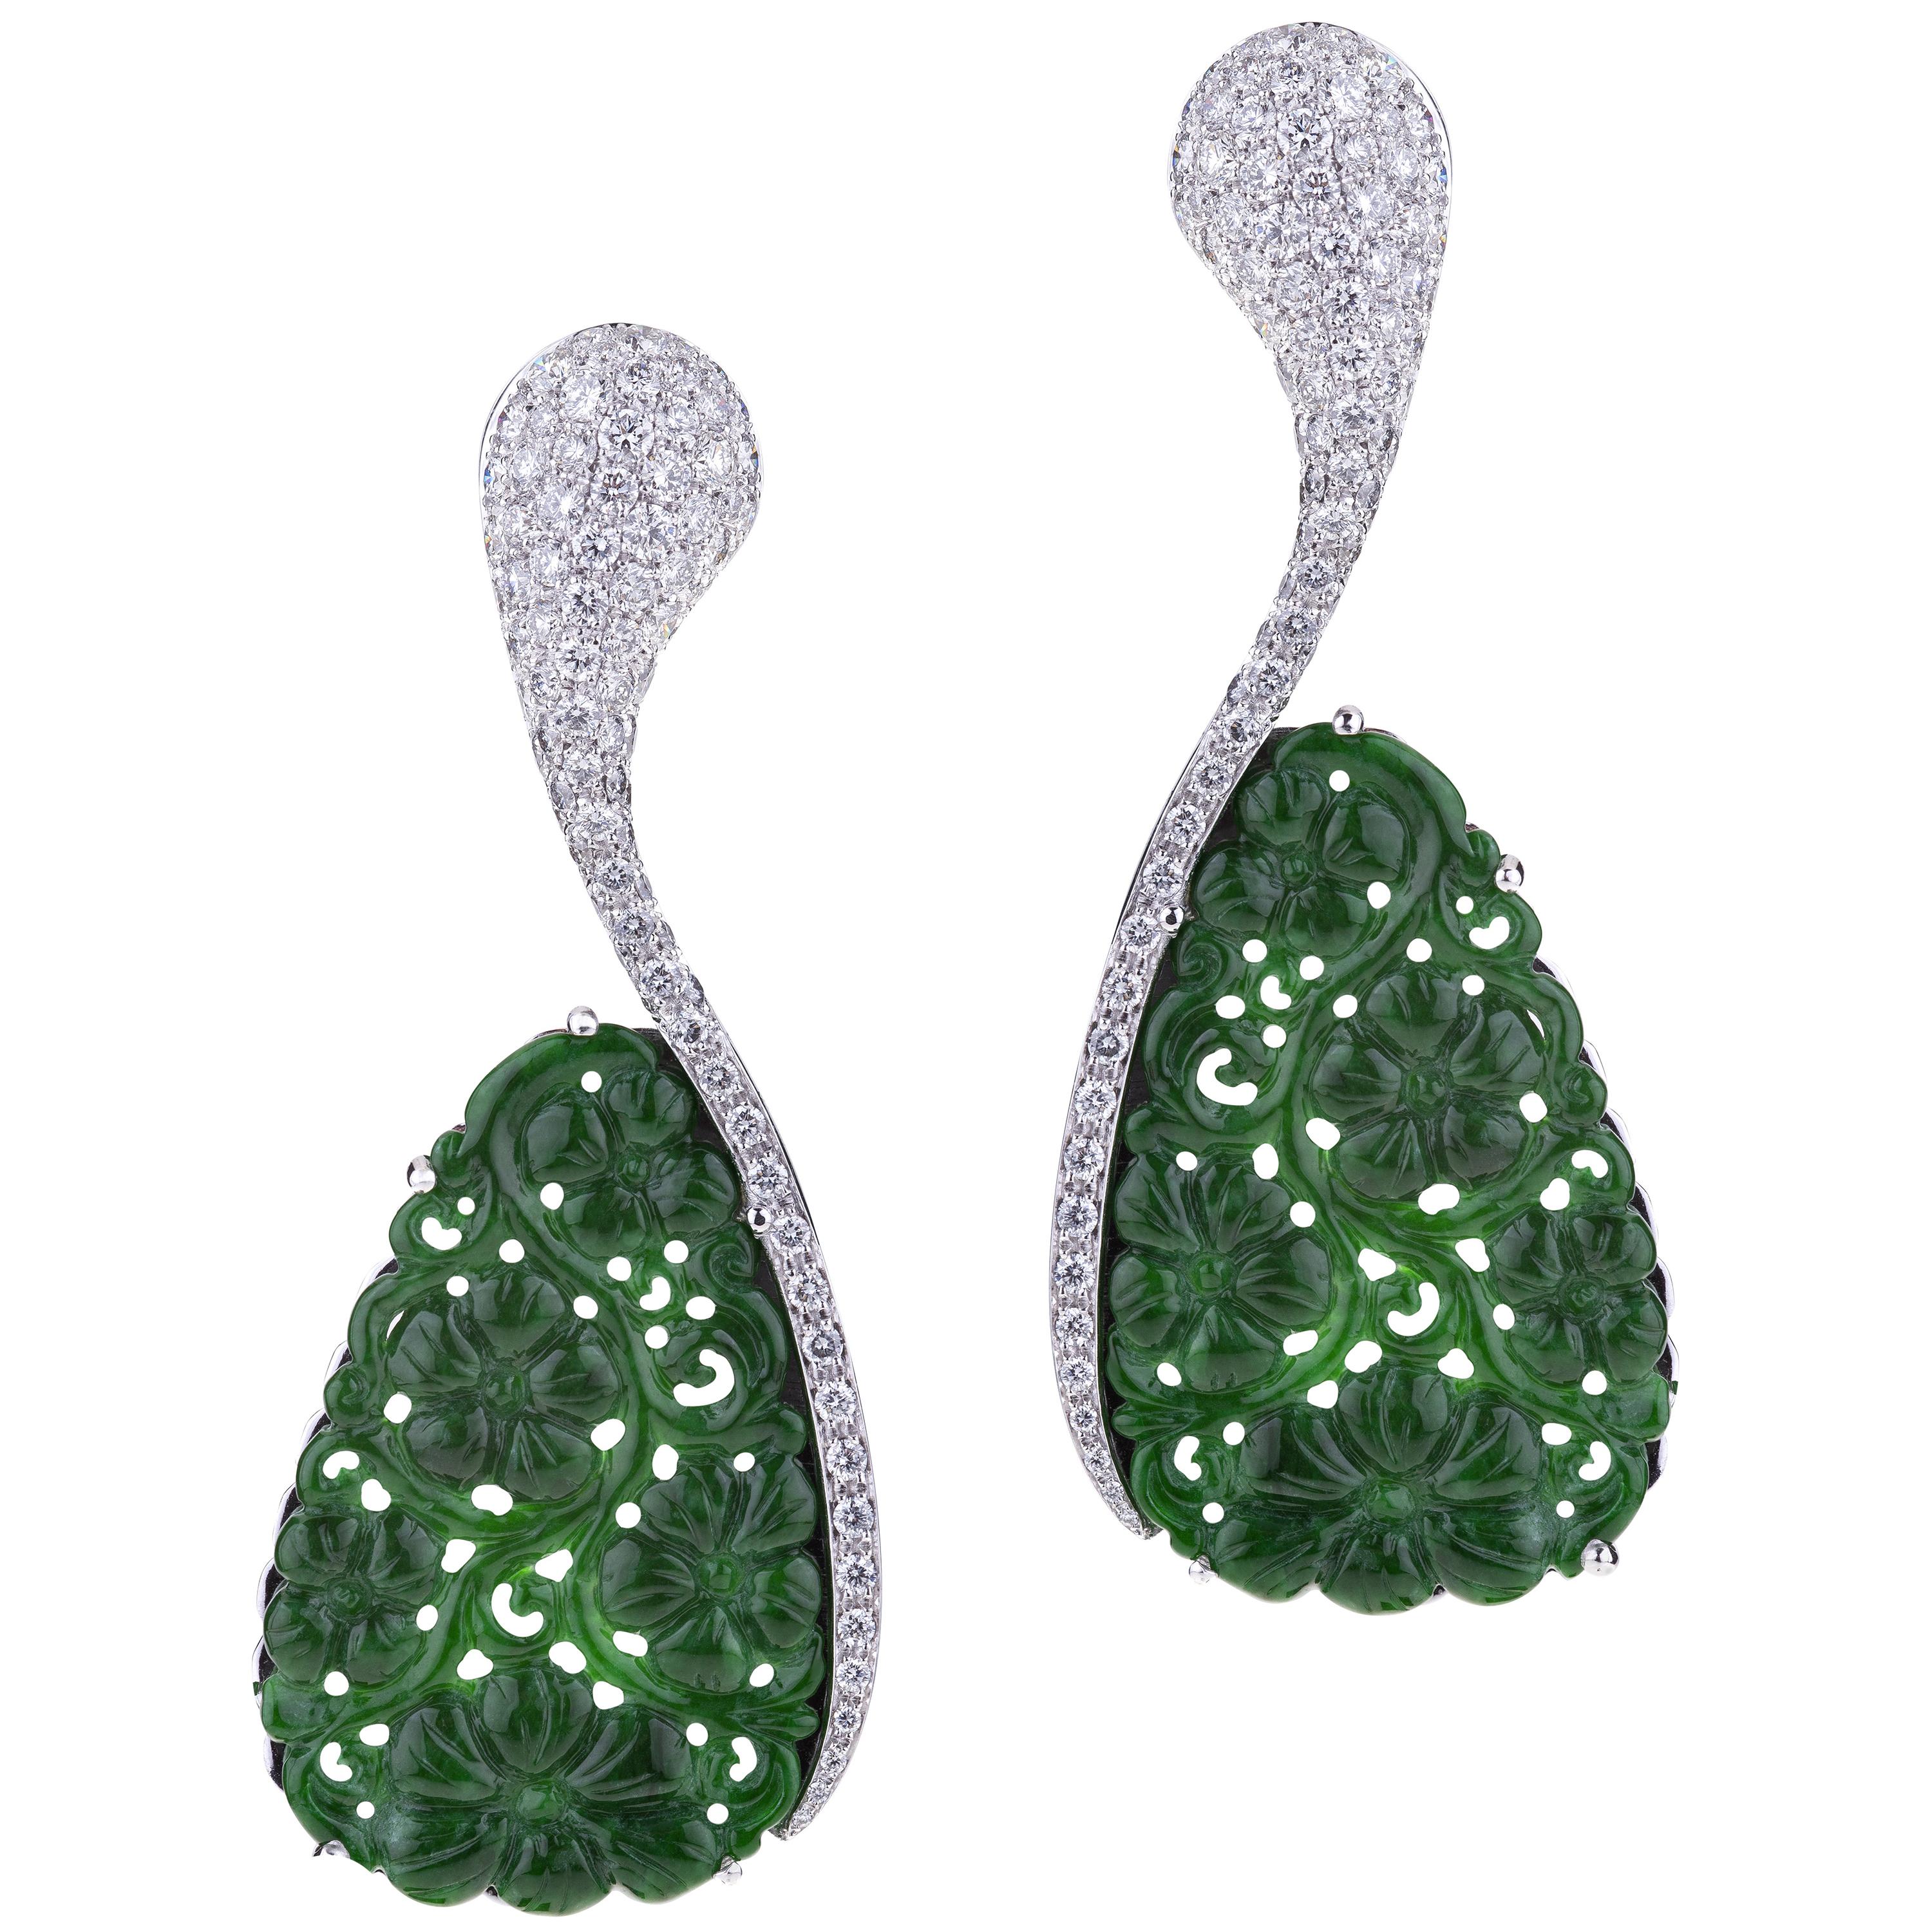 Earrings White Gold Carved Drop Green Jade And Diamonds